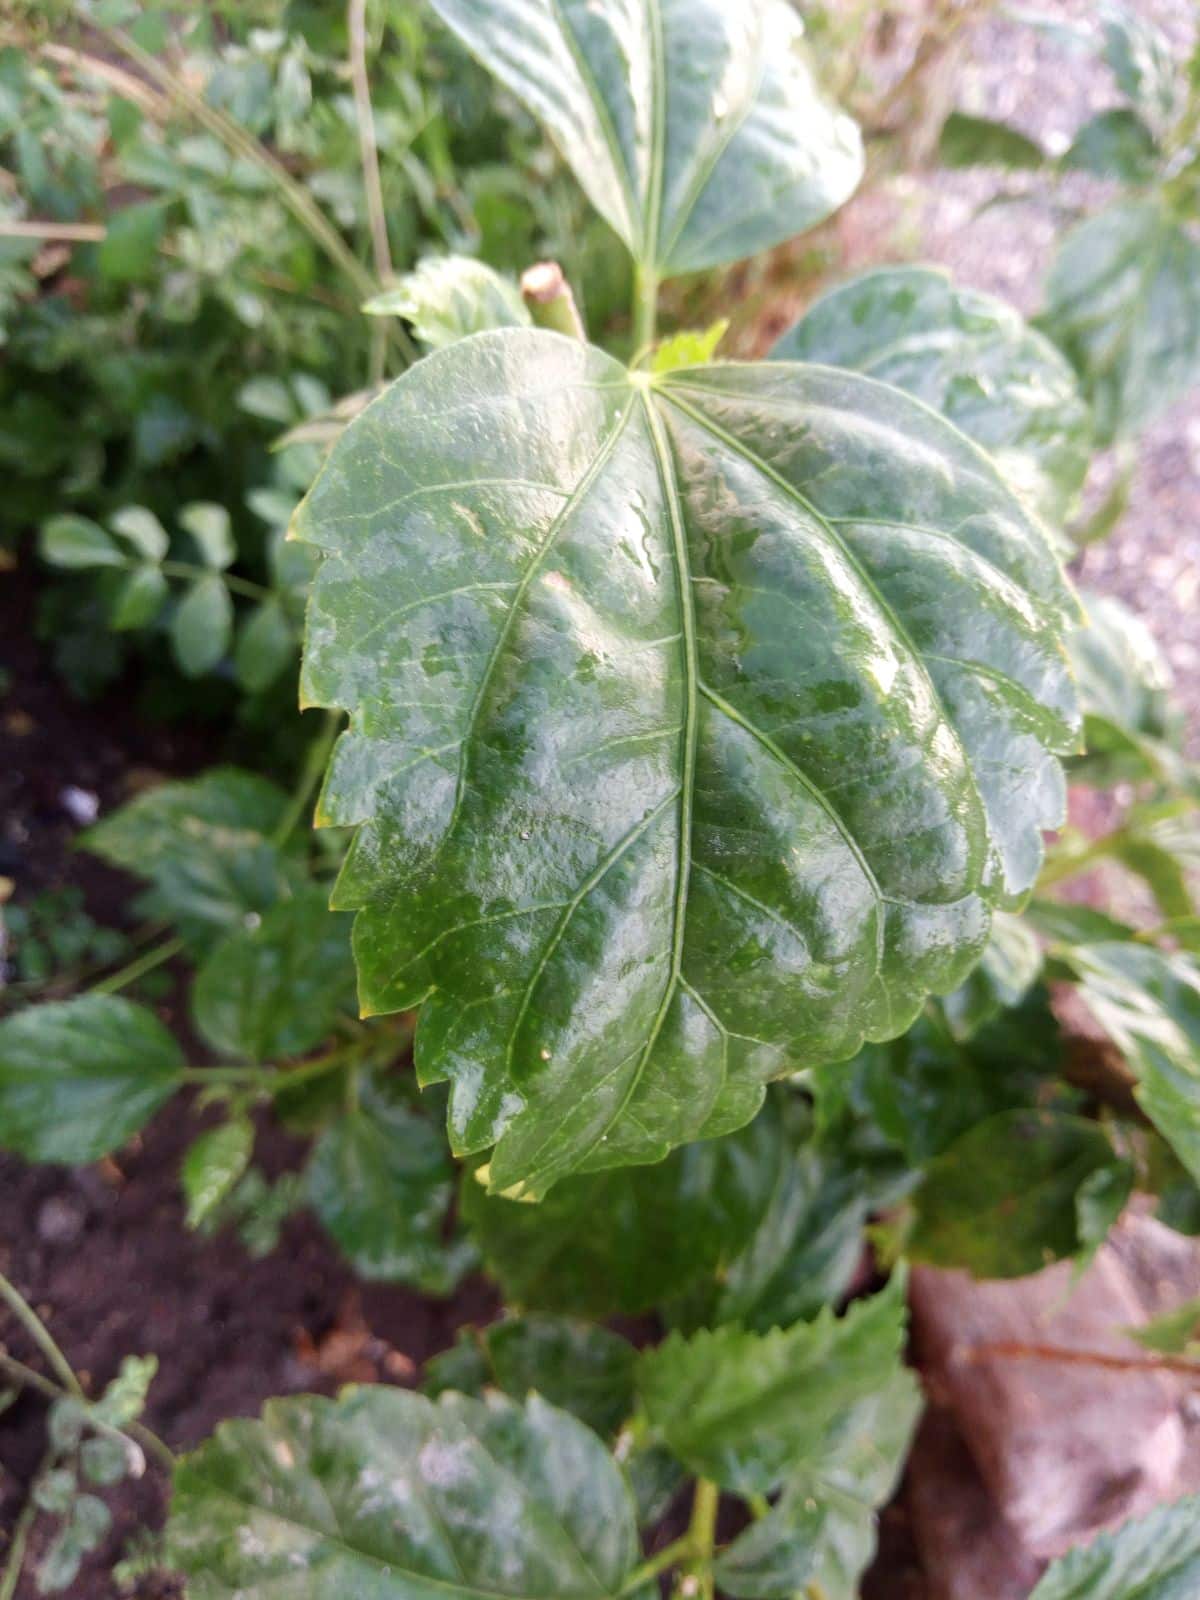 Powdery mildew caused by high humidity